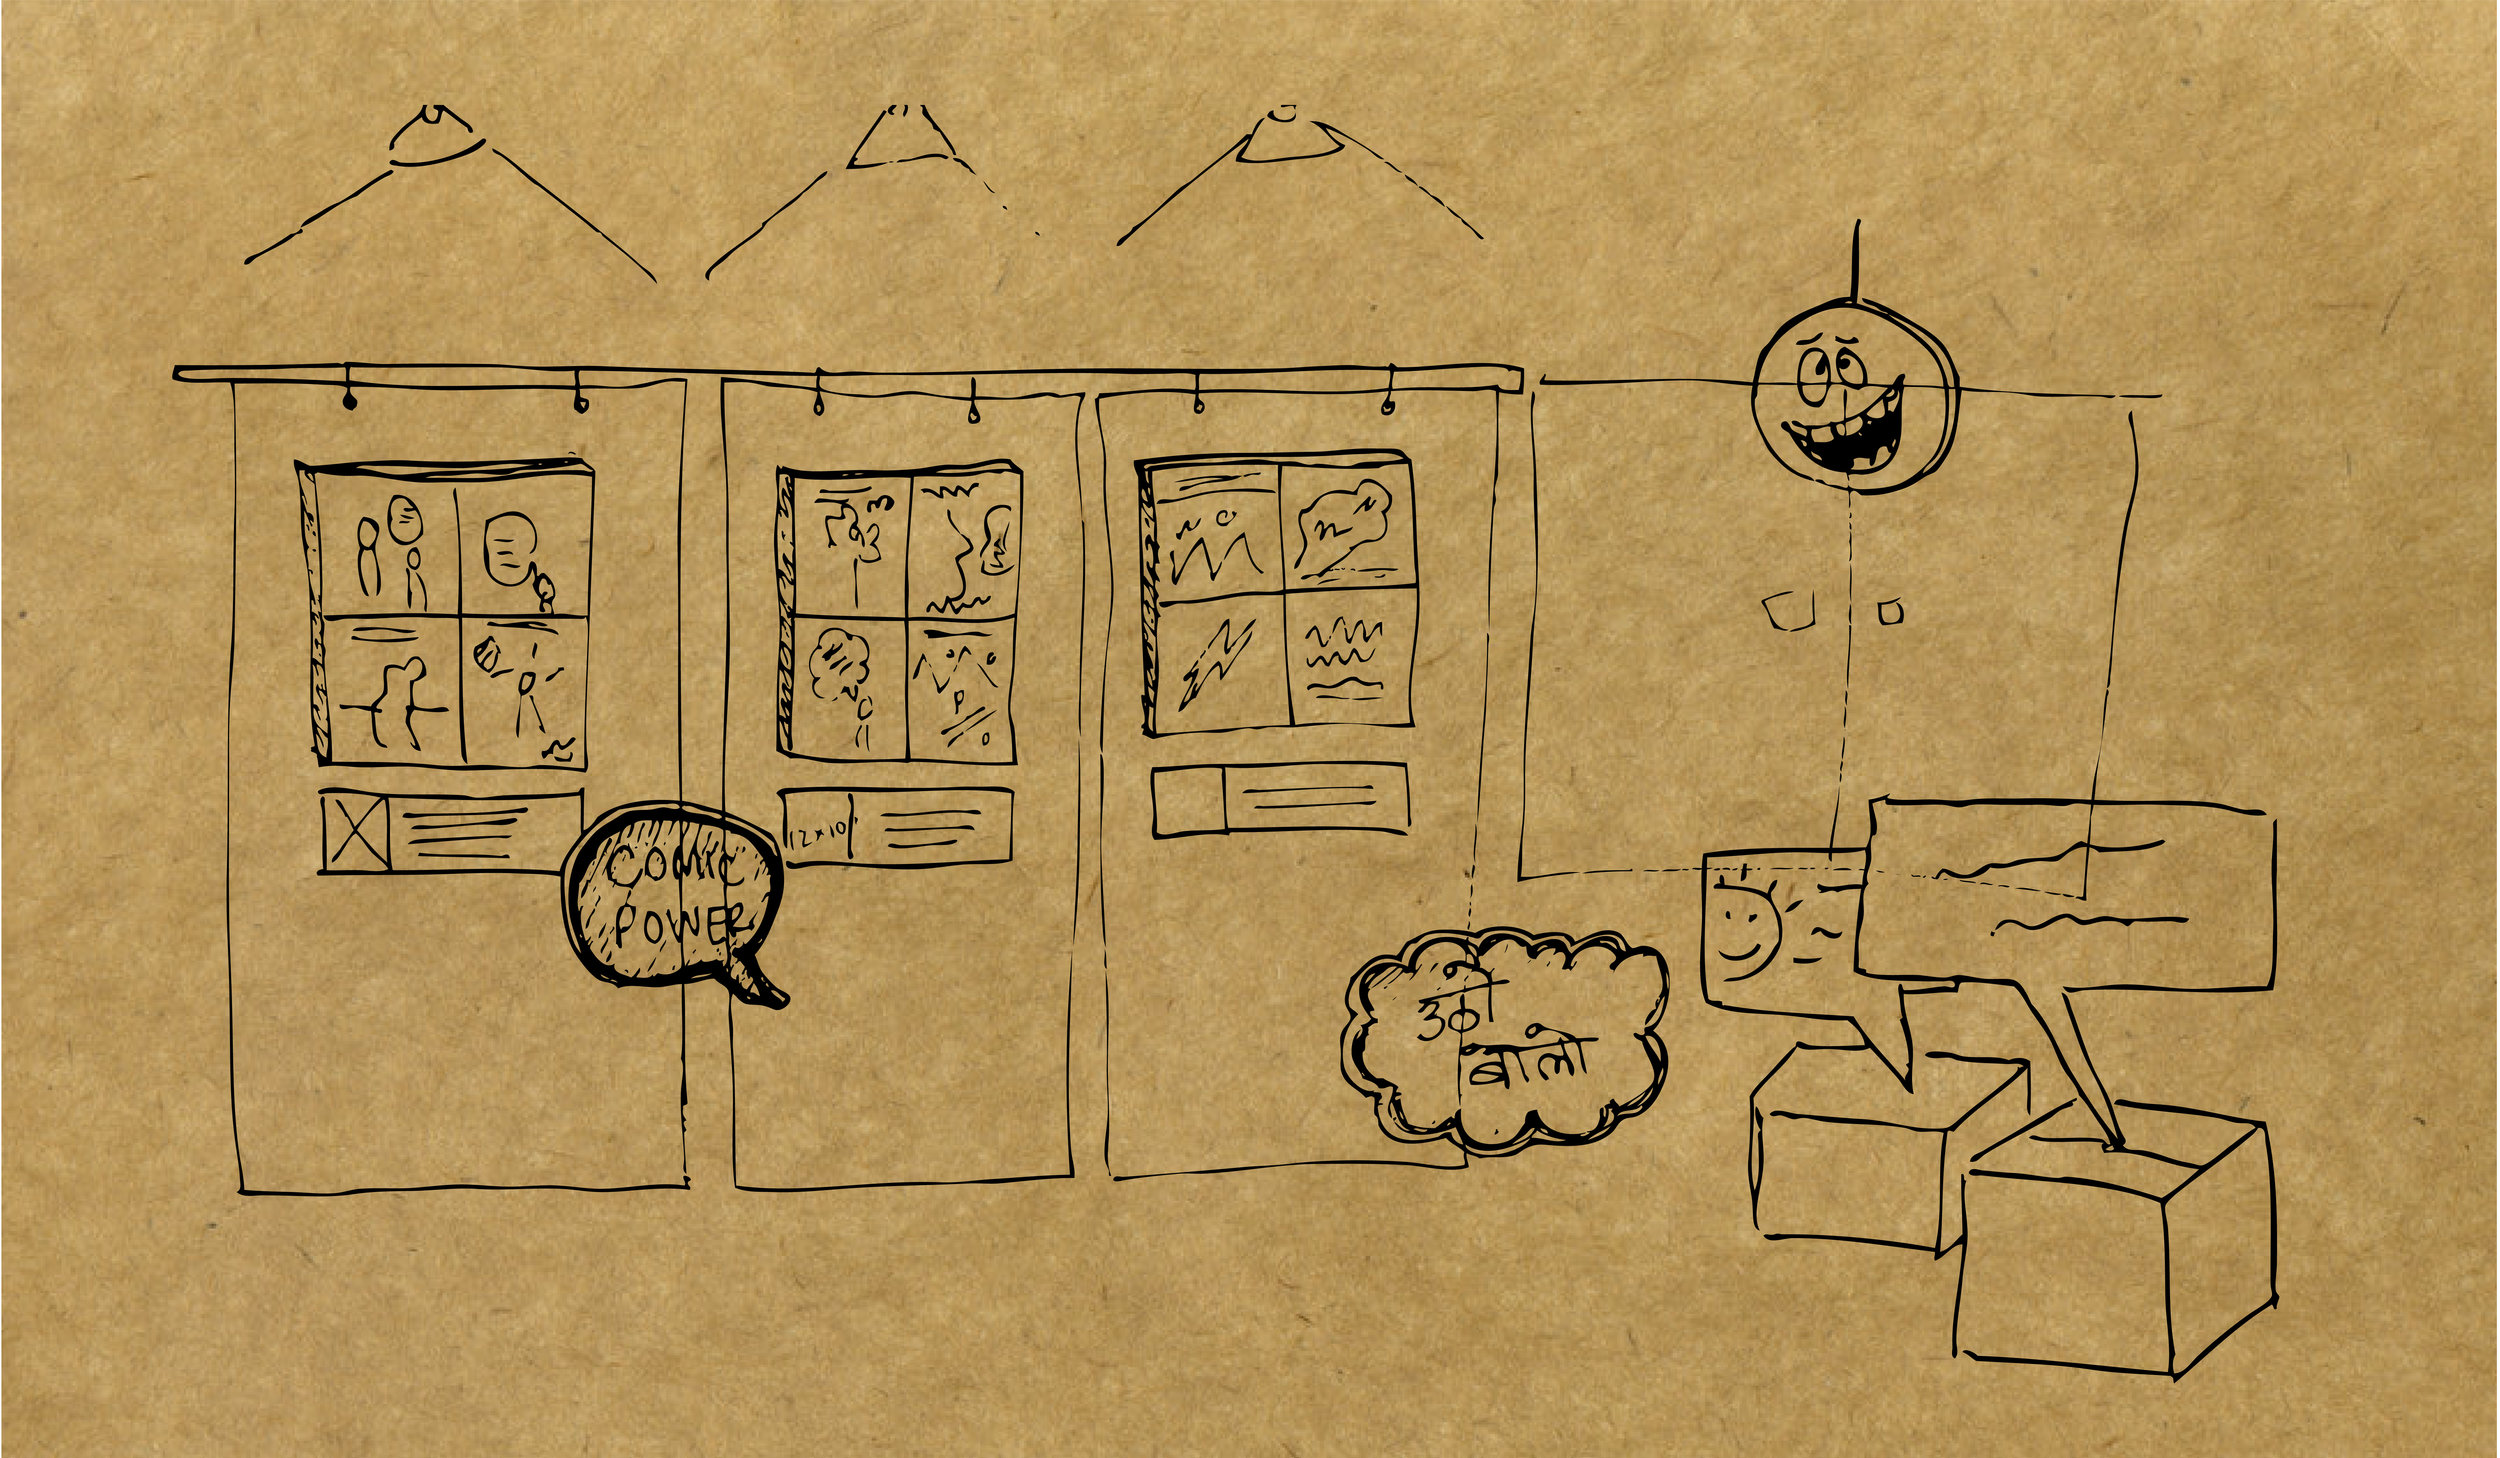 Sketch of an exhibition I proposed to museum of the comics developed during the workshop.